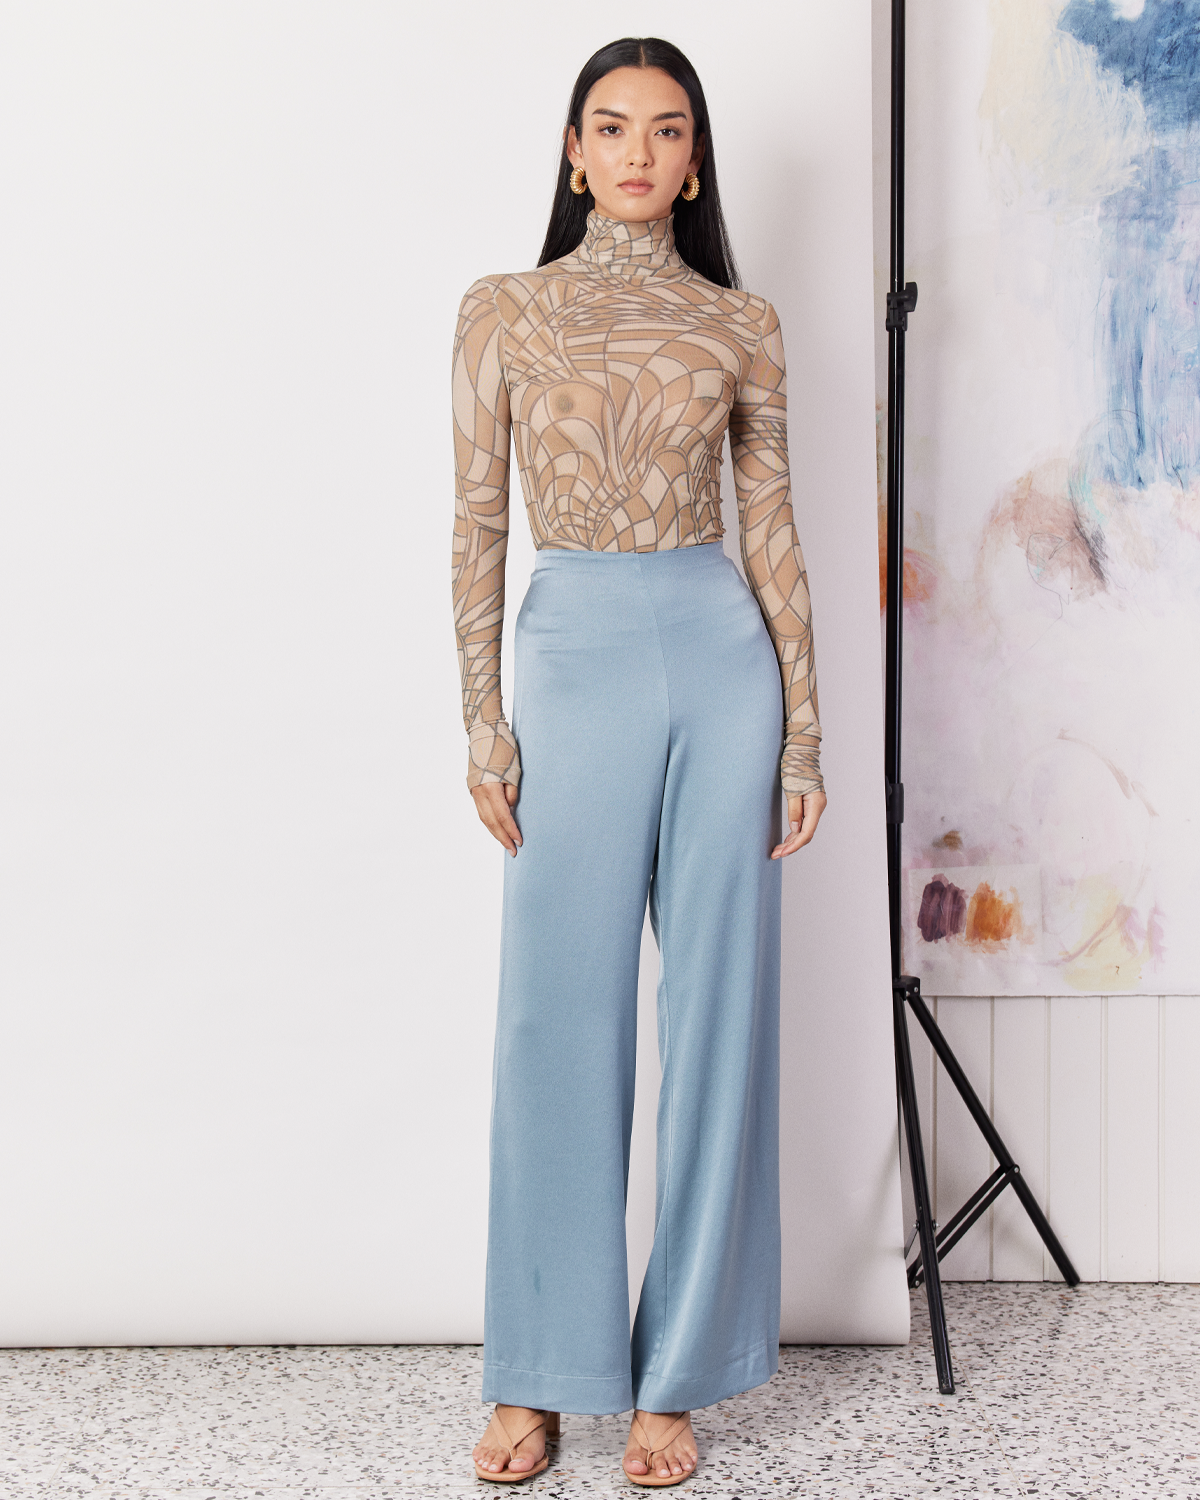 DESCRIPTION: The Fluid Satin Pants are a loose fitting pant featuring a high waist with an elastic detail making them comfortable to wear all day long. DETAILS:80% Acetate, 20% PolyesterMade in China CARE:Dry Clean Only. SIZE AND FIT:Model is between a size 6 and 8 and wearing a size XS. By Romy. 